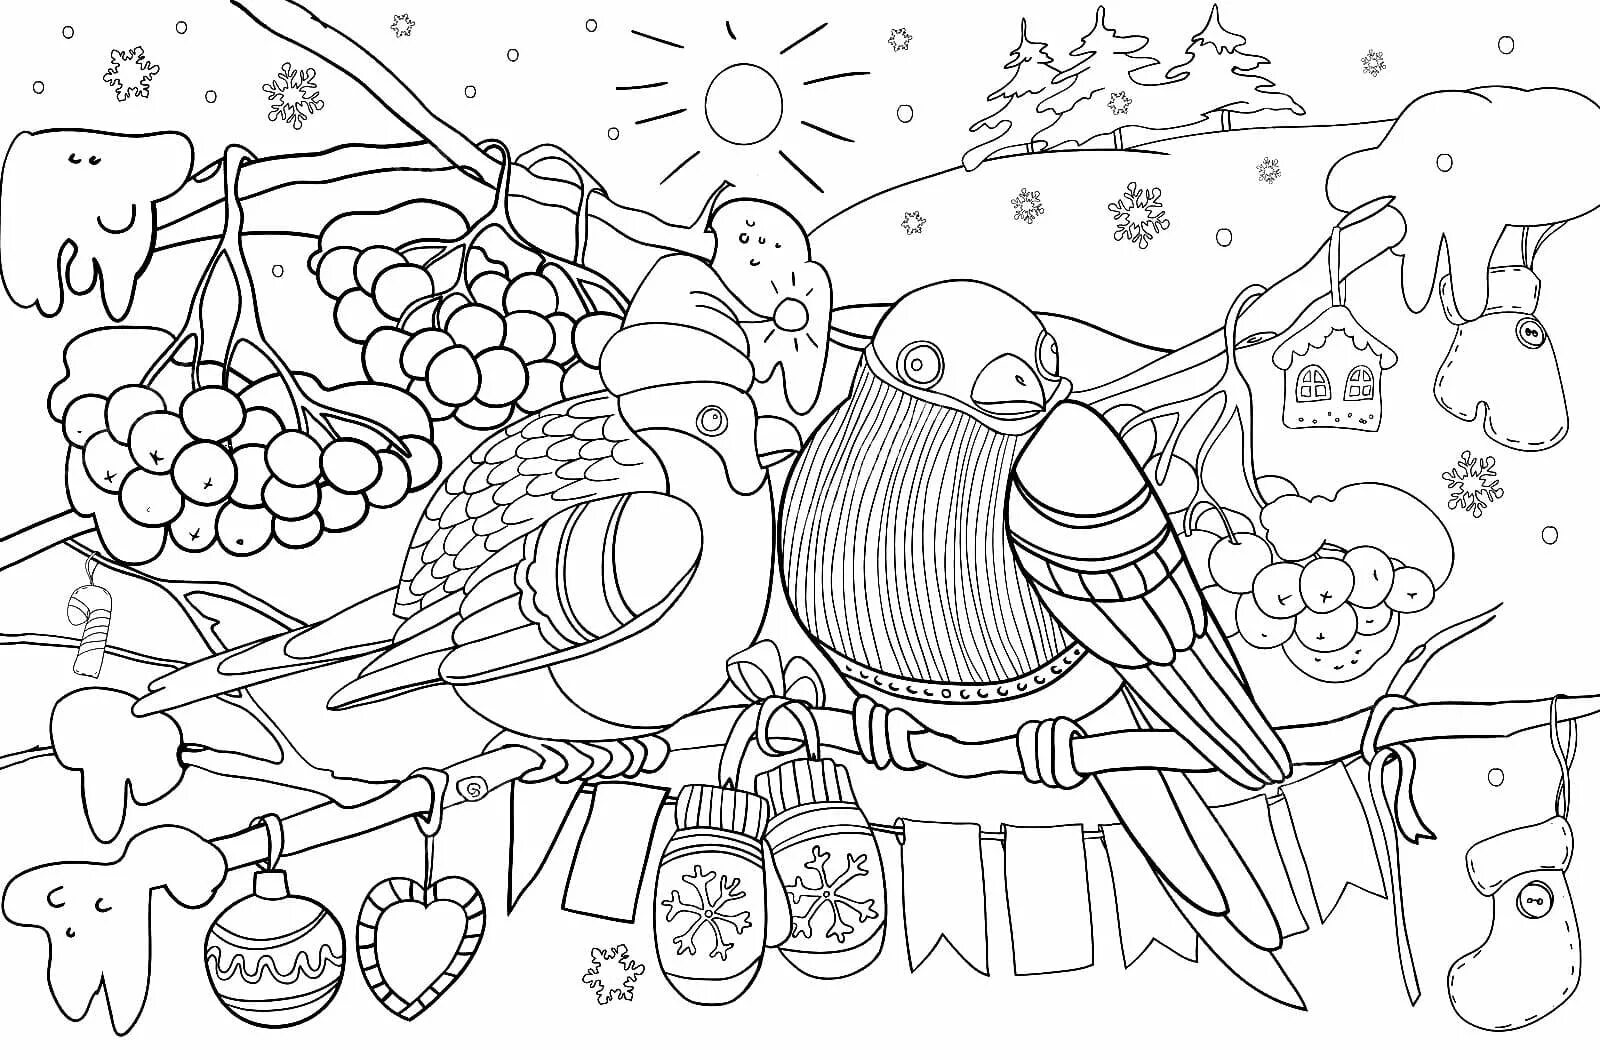 Amazing bird feeder coloring page for kids